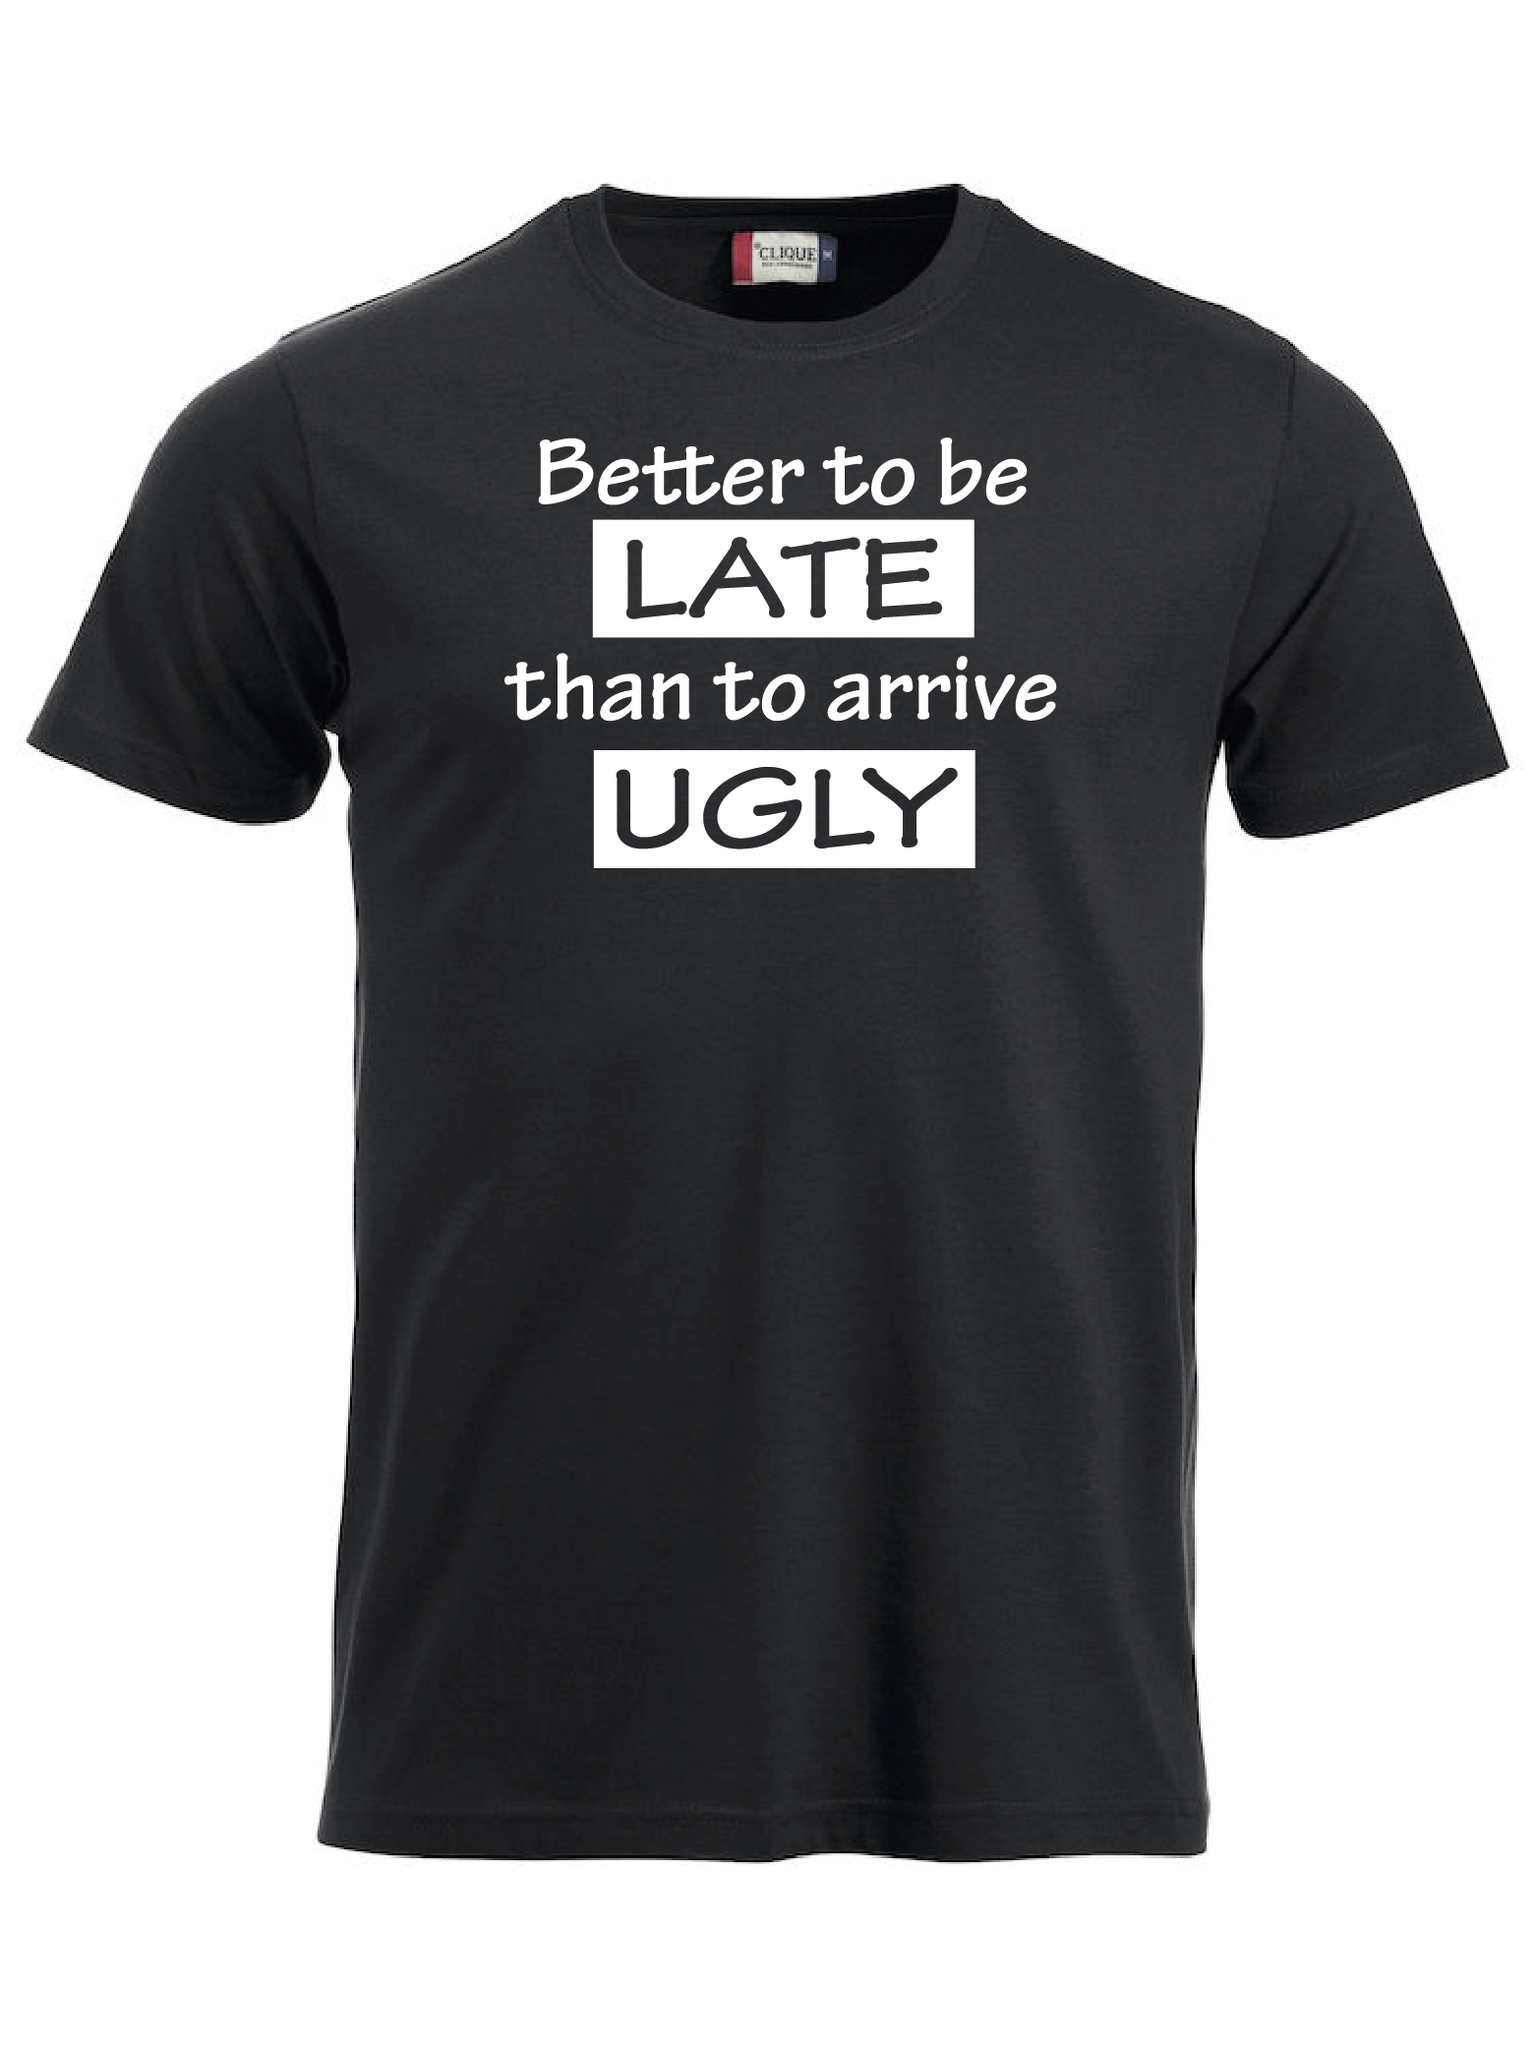 T-shirt "BETTER LATE THAN UGLY"